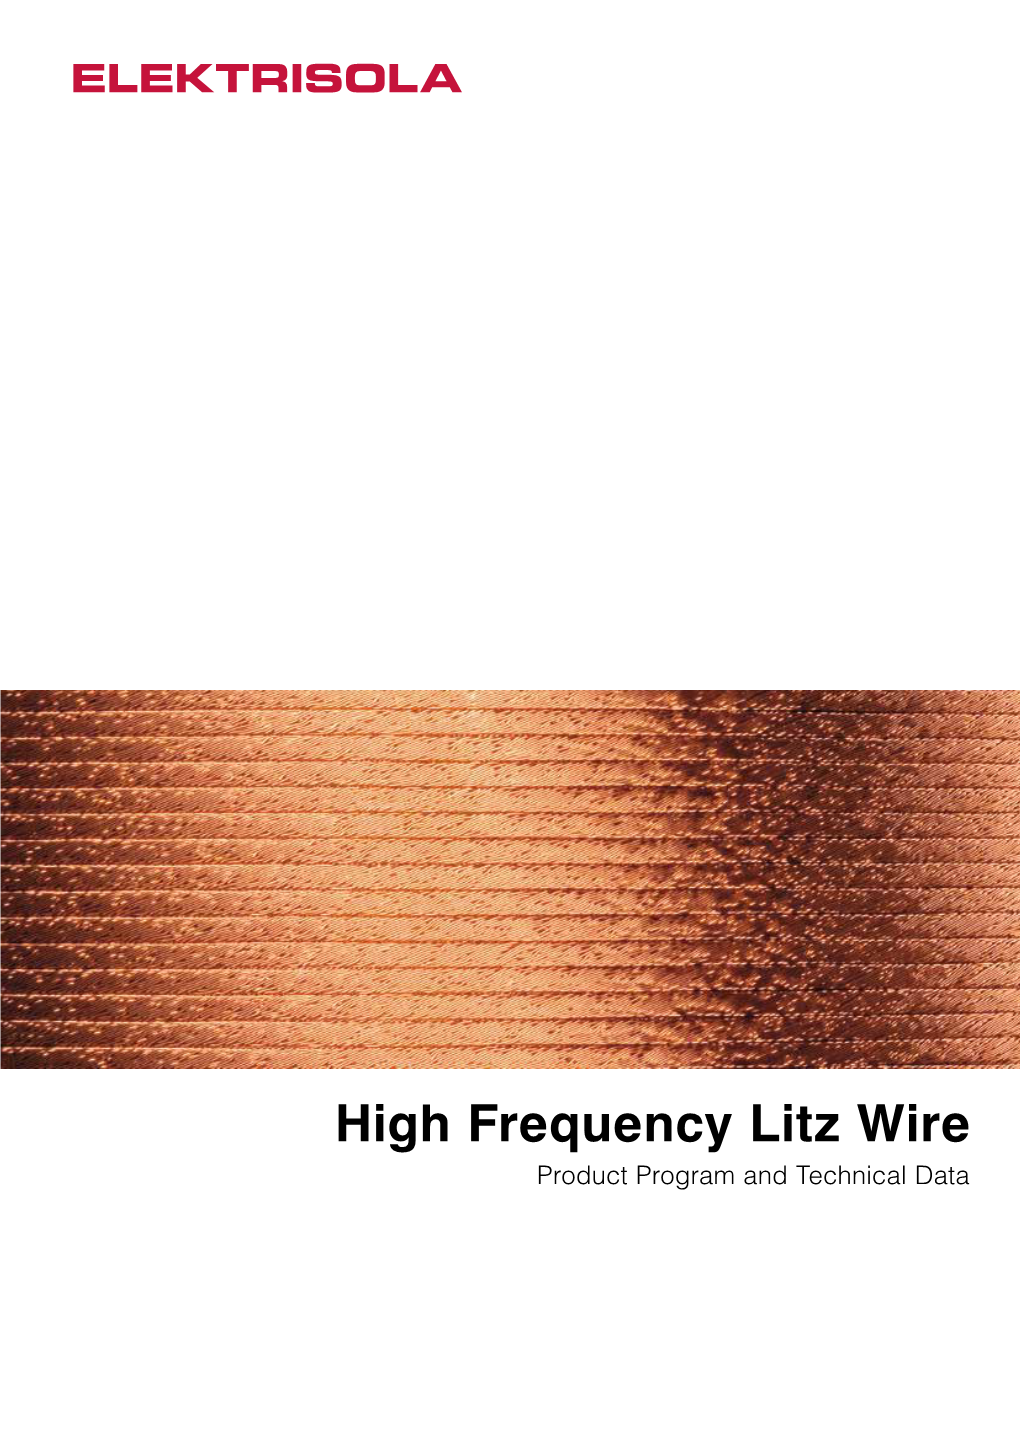 High Frequency Litz Wire Product Program and Technical Data Content